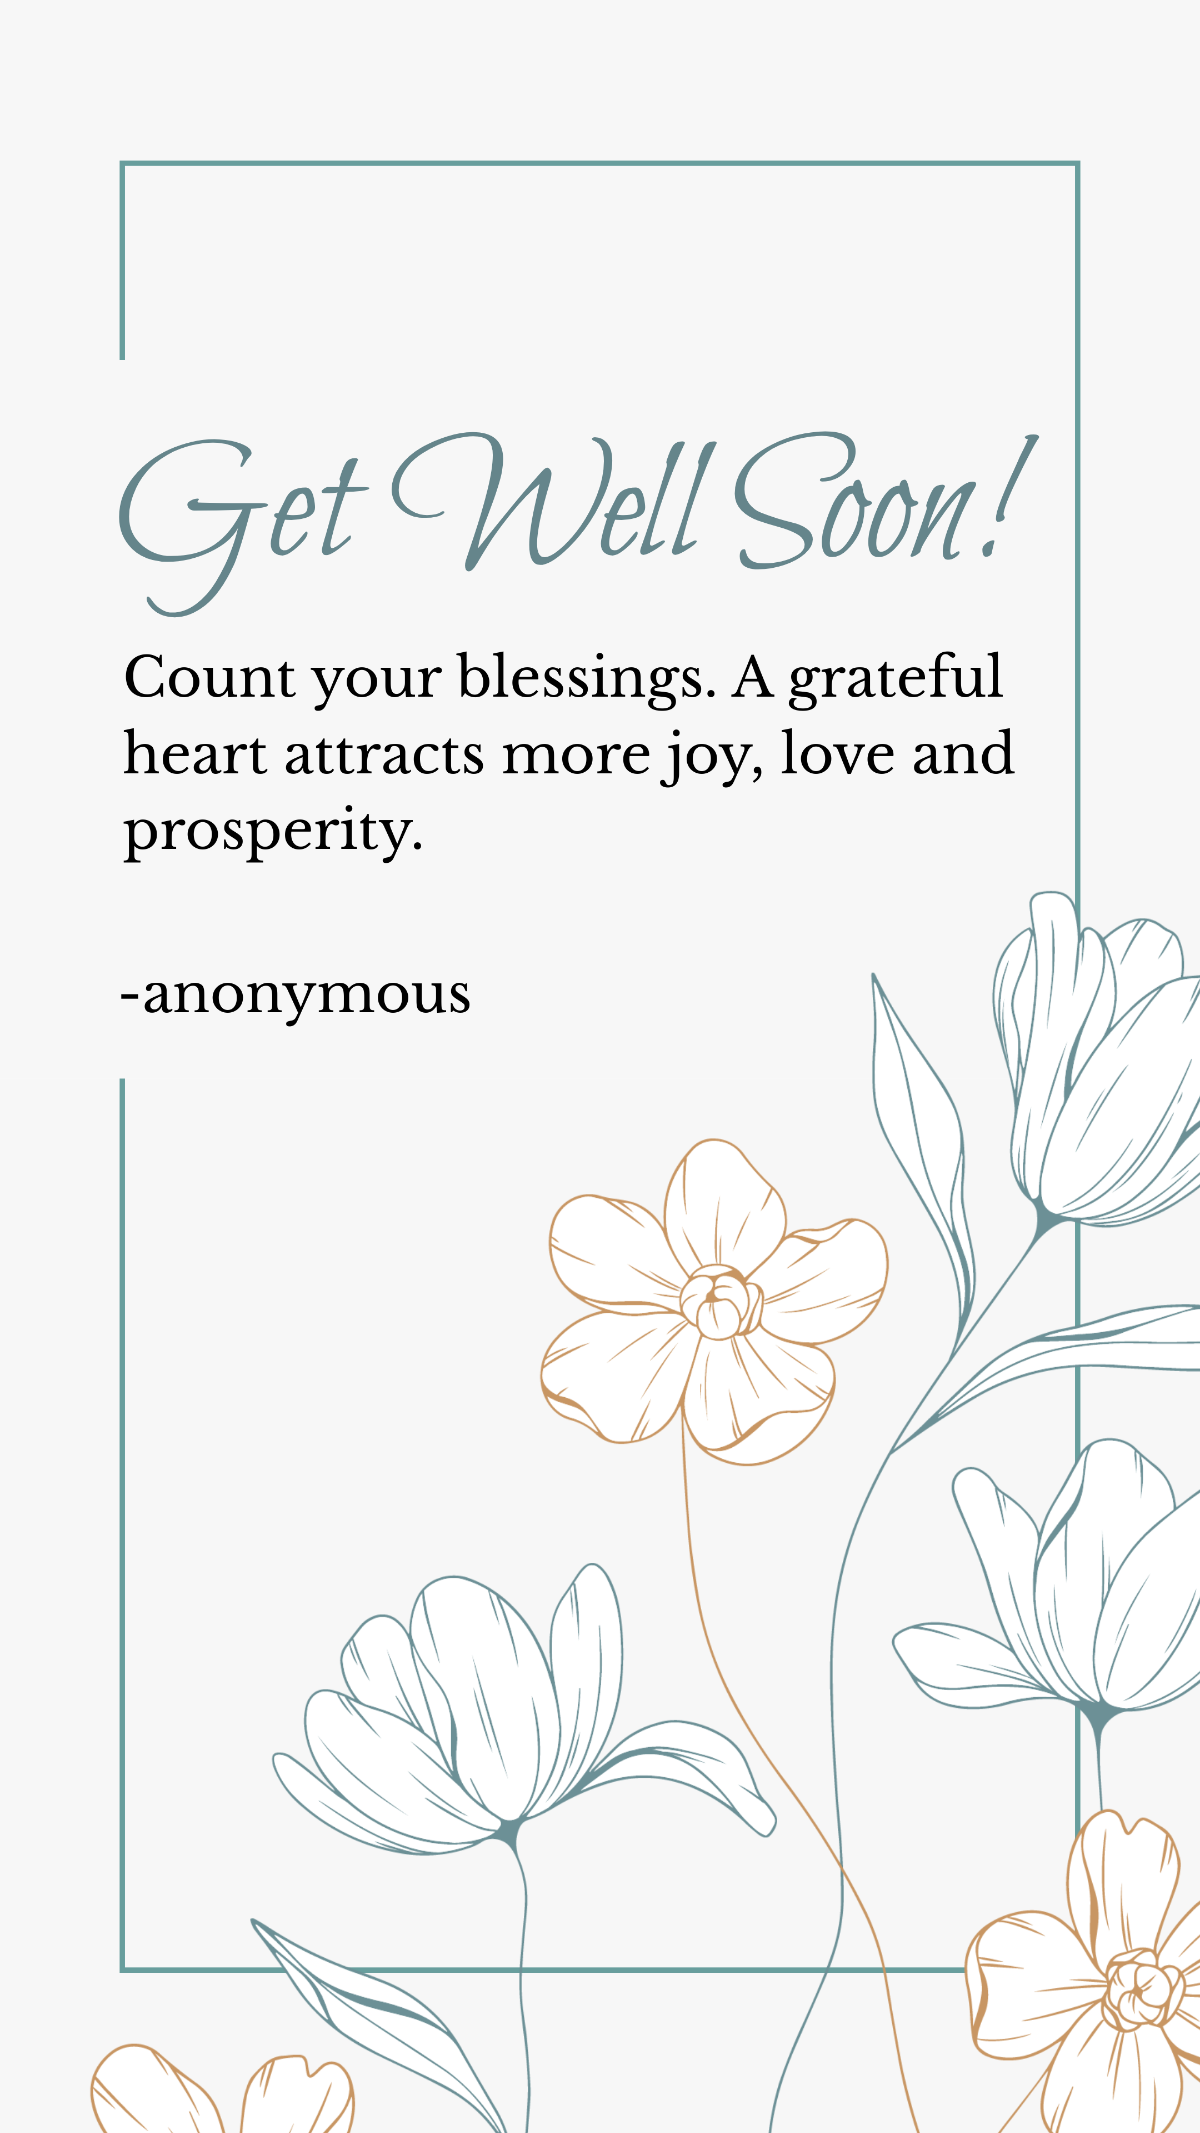 Get Well Soon Blessings Quote